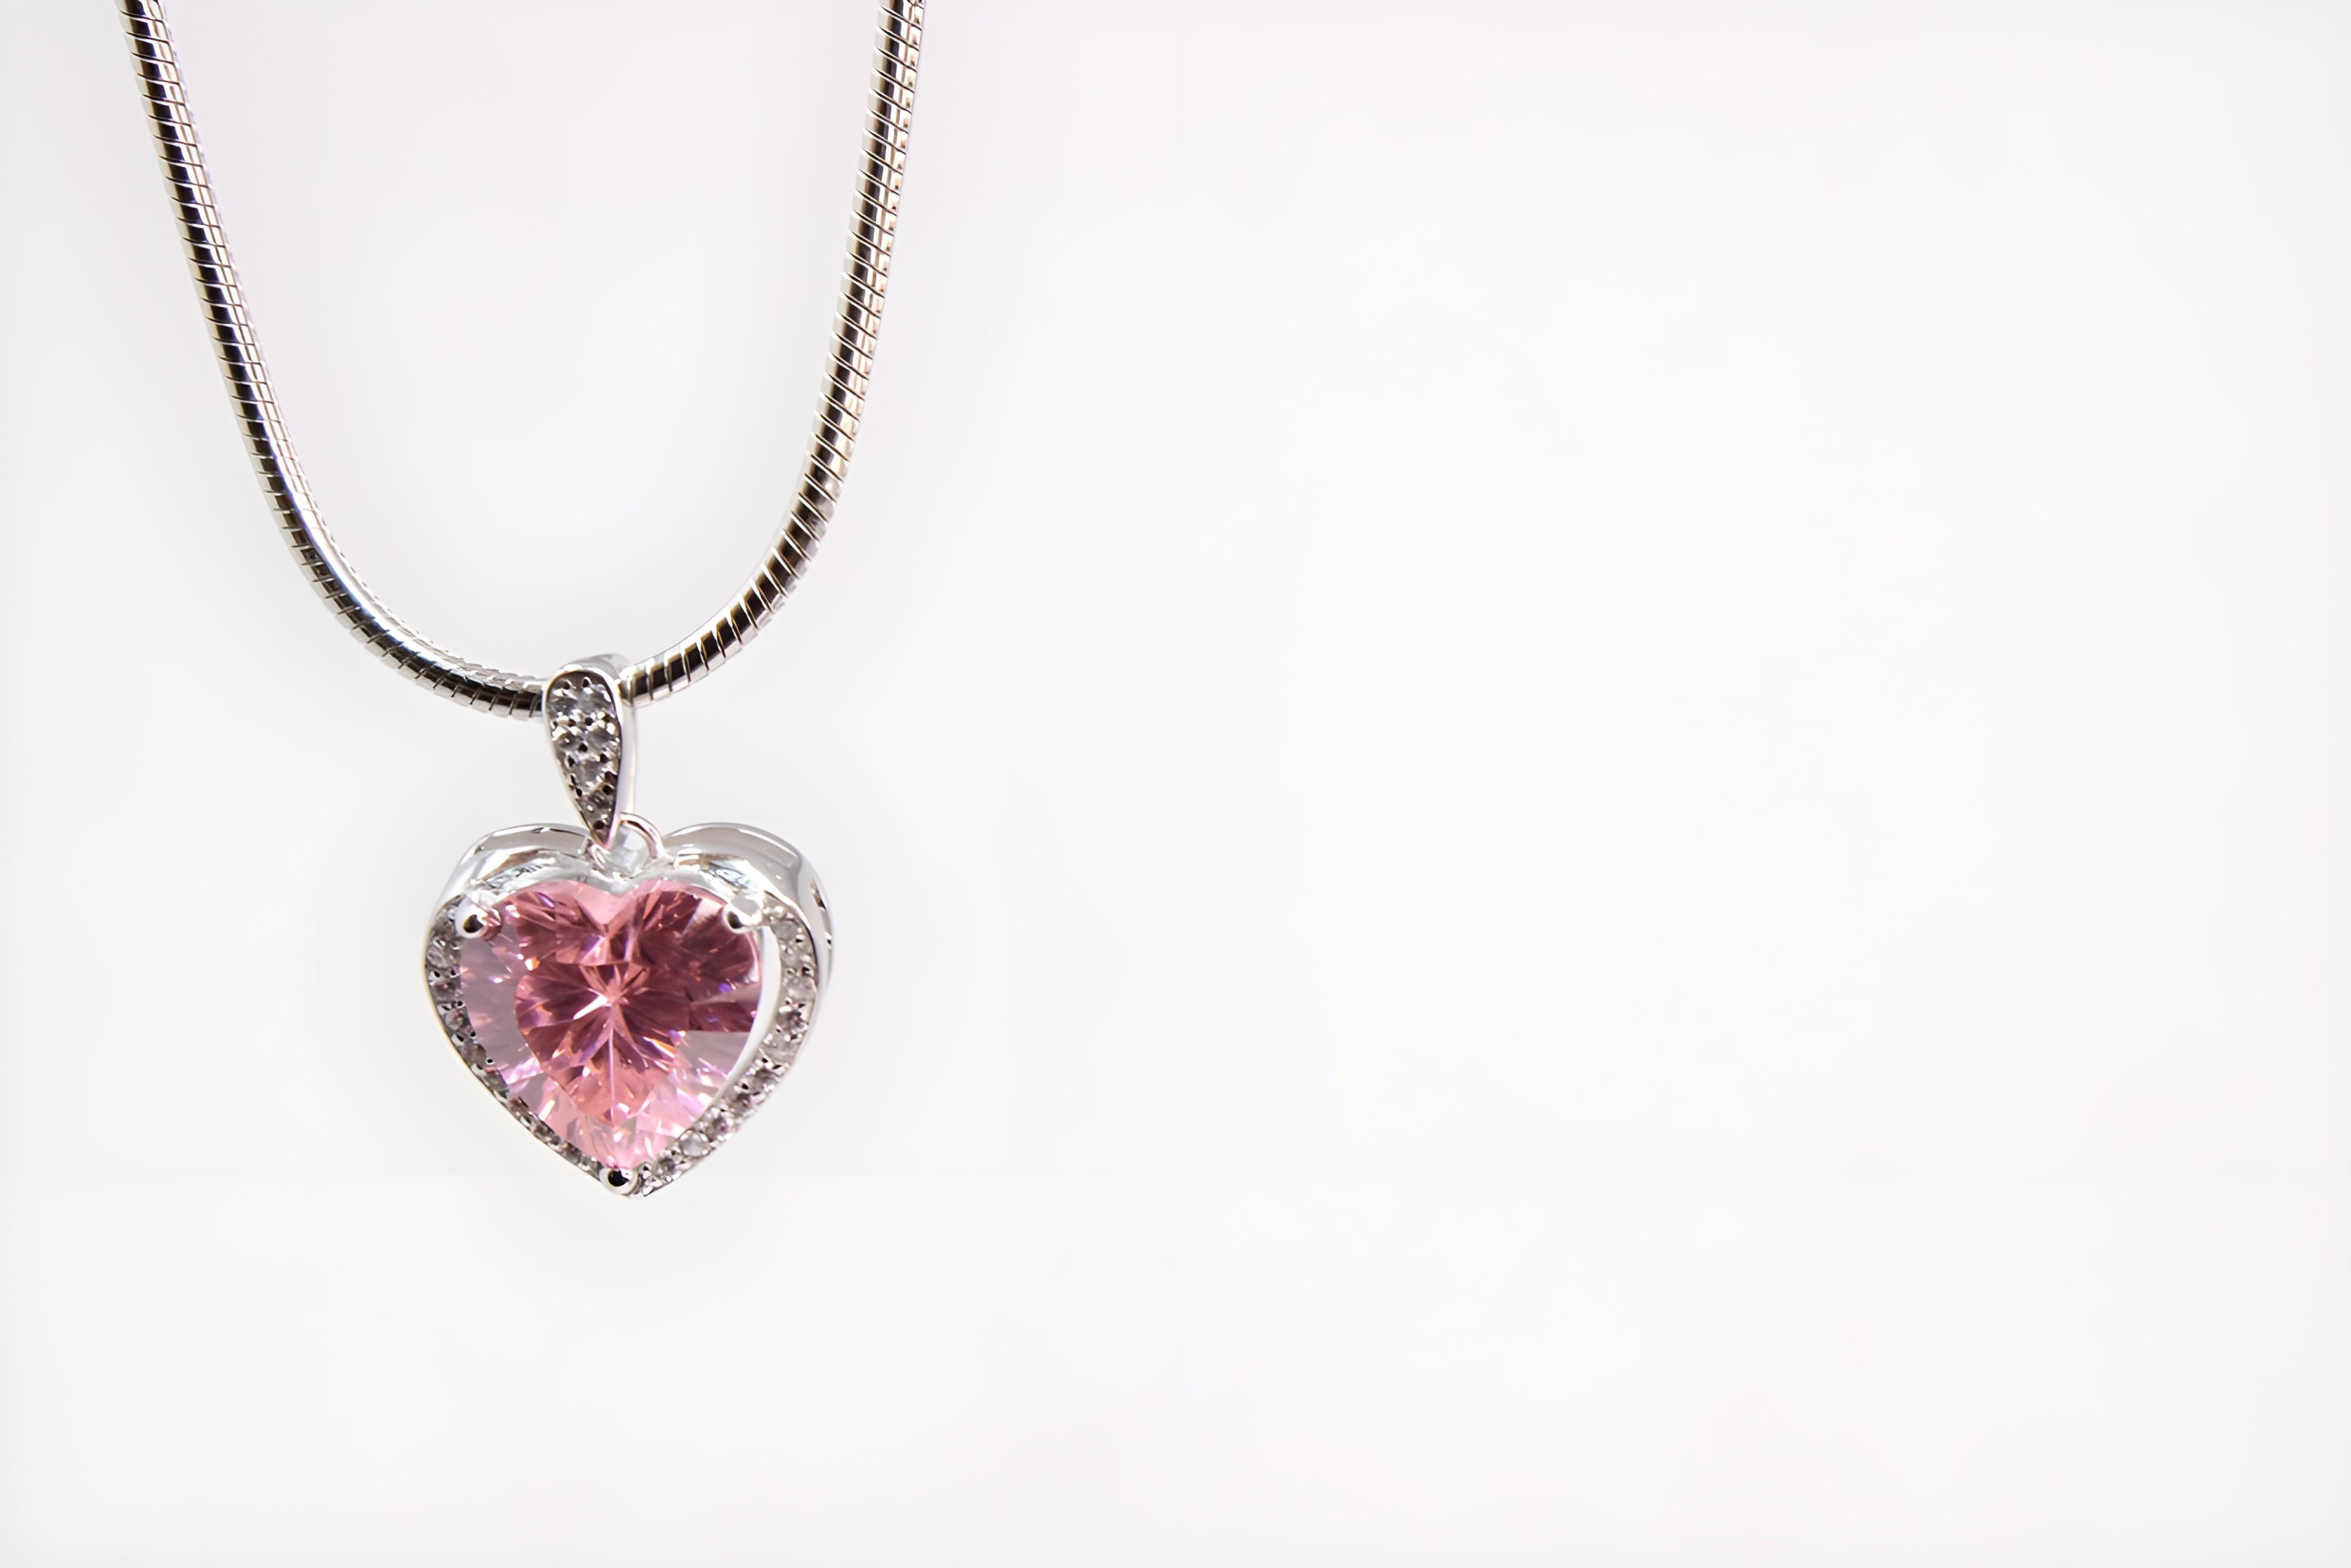 Heart-Shaped Pendant in 92.5 Sterling Silver with Swarovski Crystals